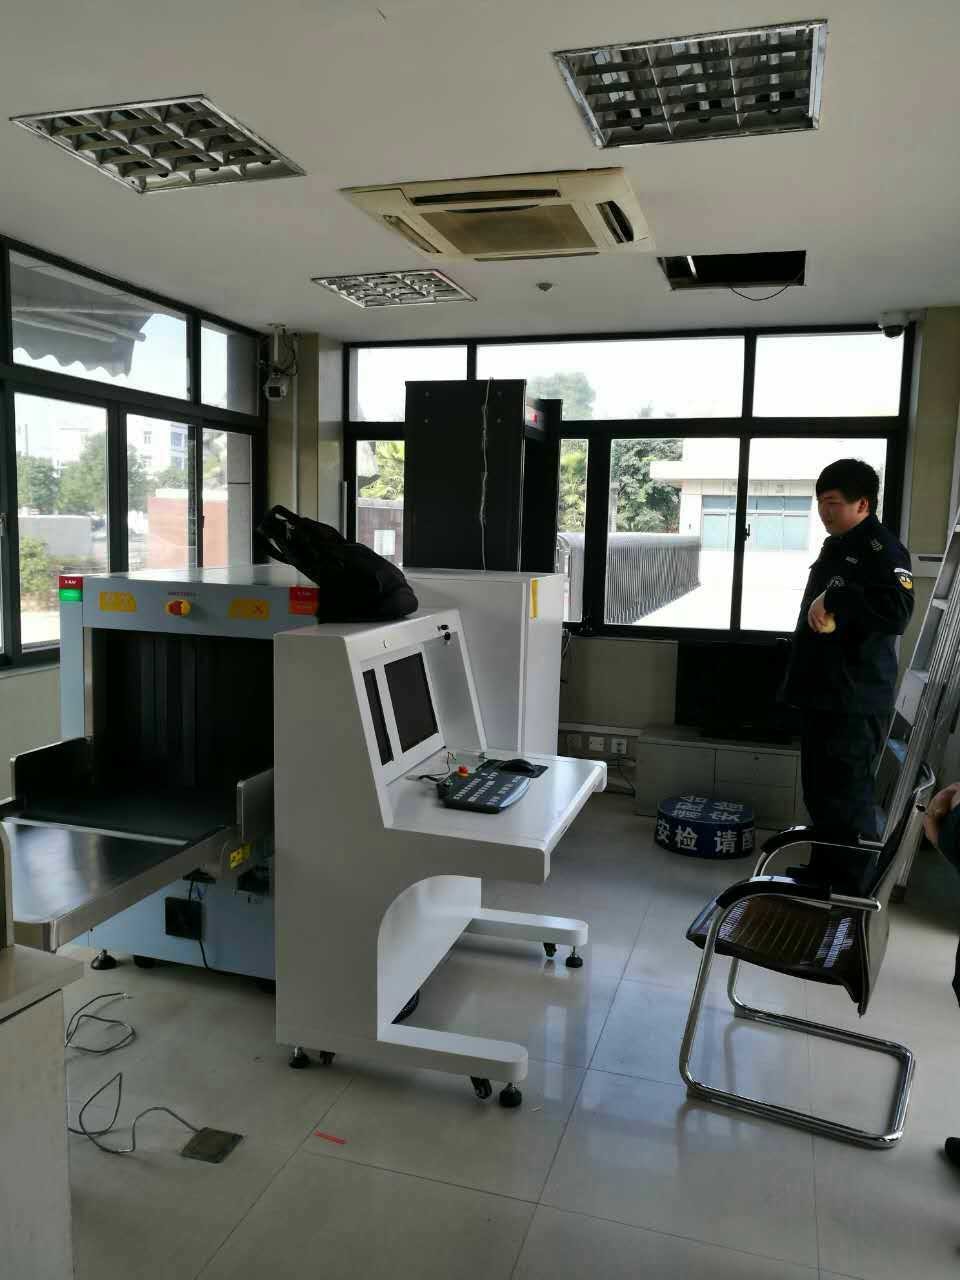 Handbag Checker Baggage and Luggage, Parcel Inspection Security X-ray Machine with Dual-View Imaging